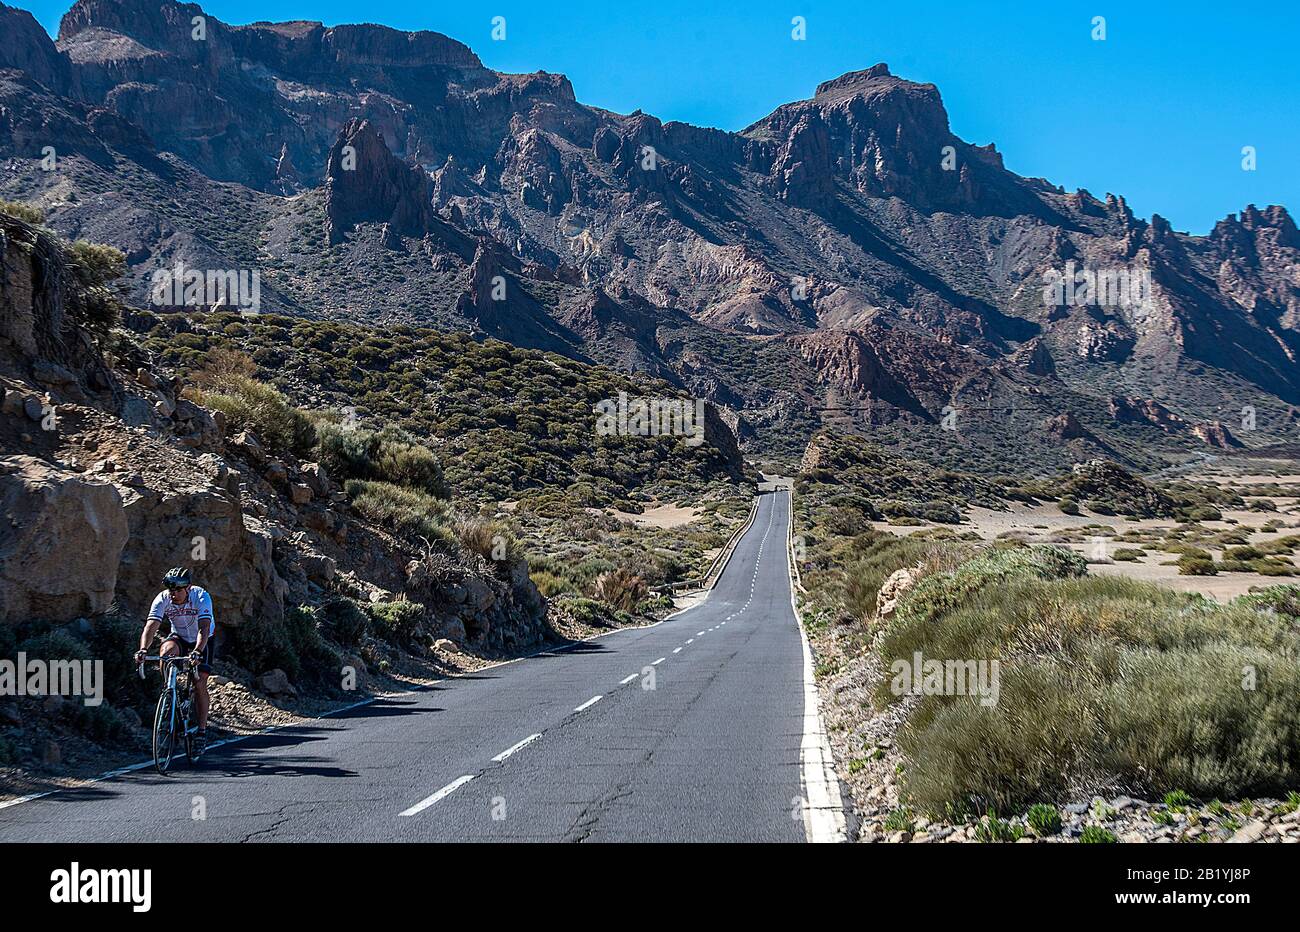 Cyclist on the road to Mount Teide, Tenerife, Canary Islands, Spain Stock Photo